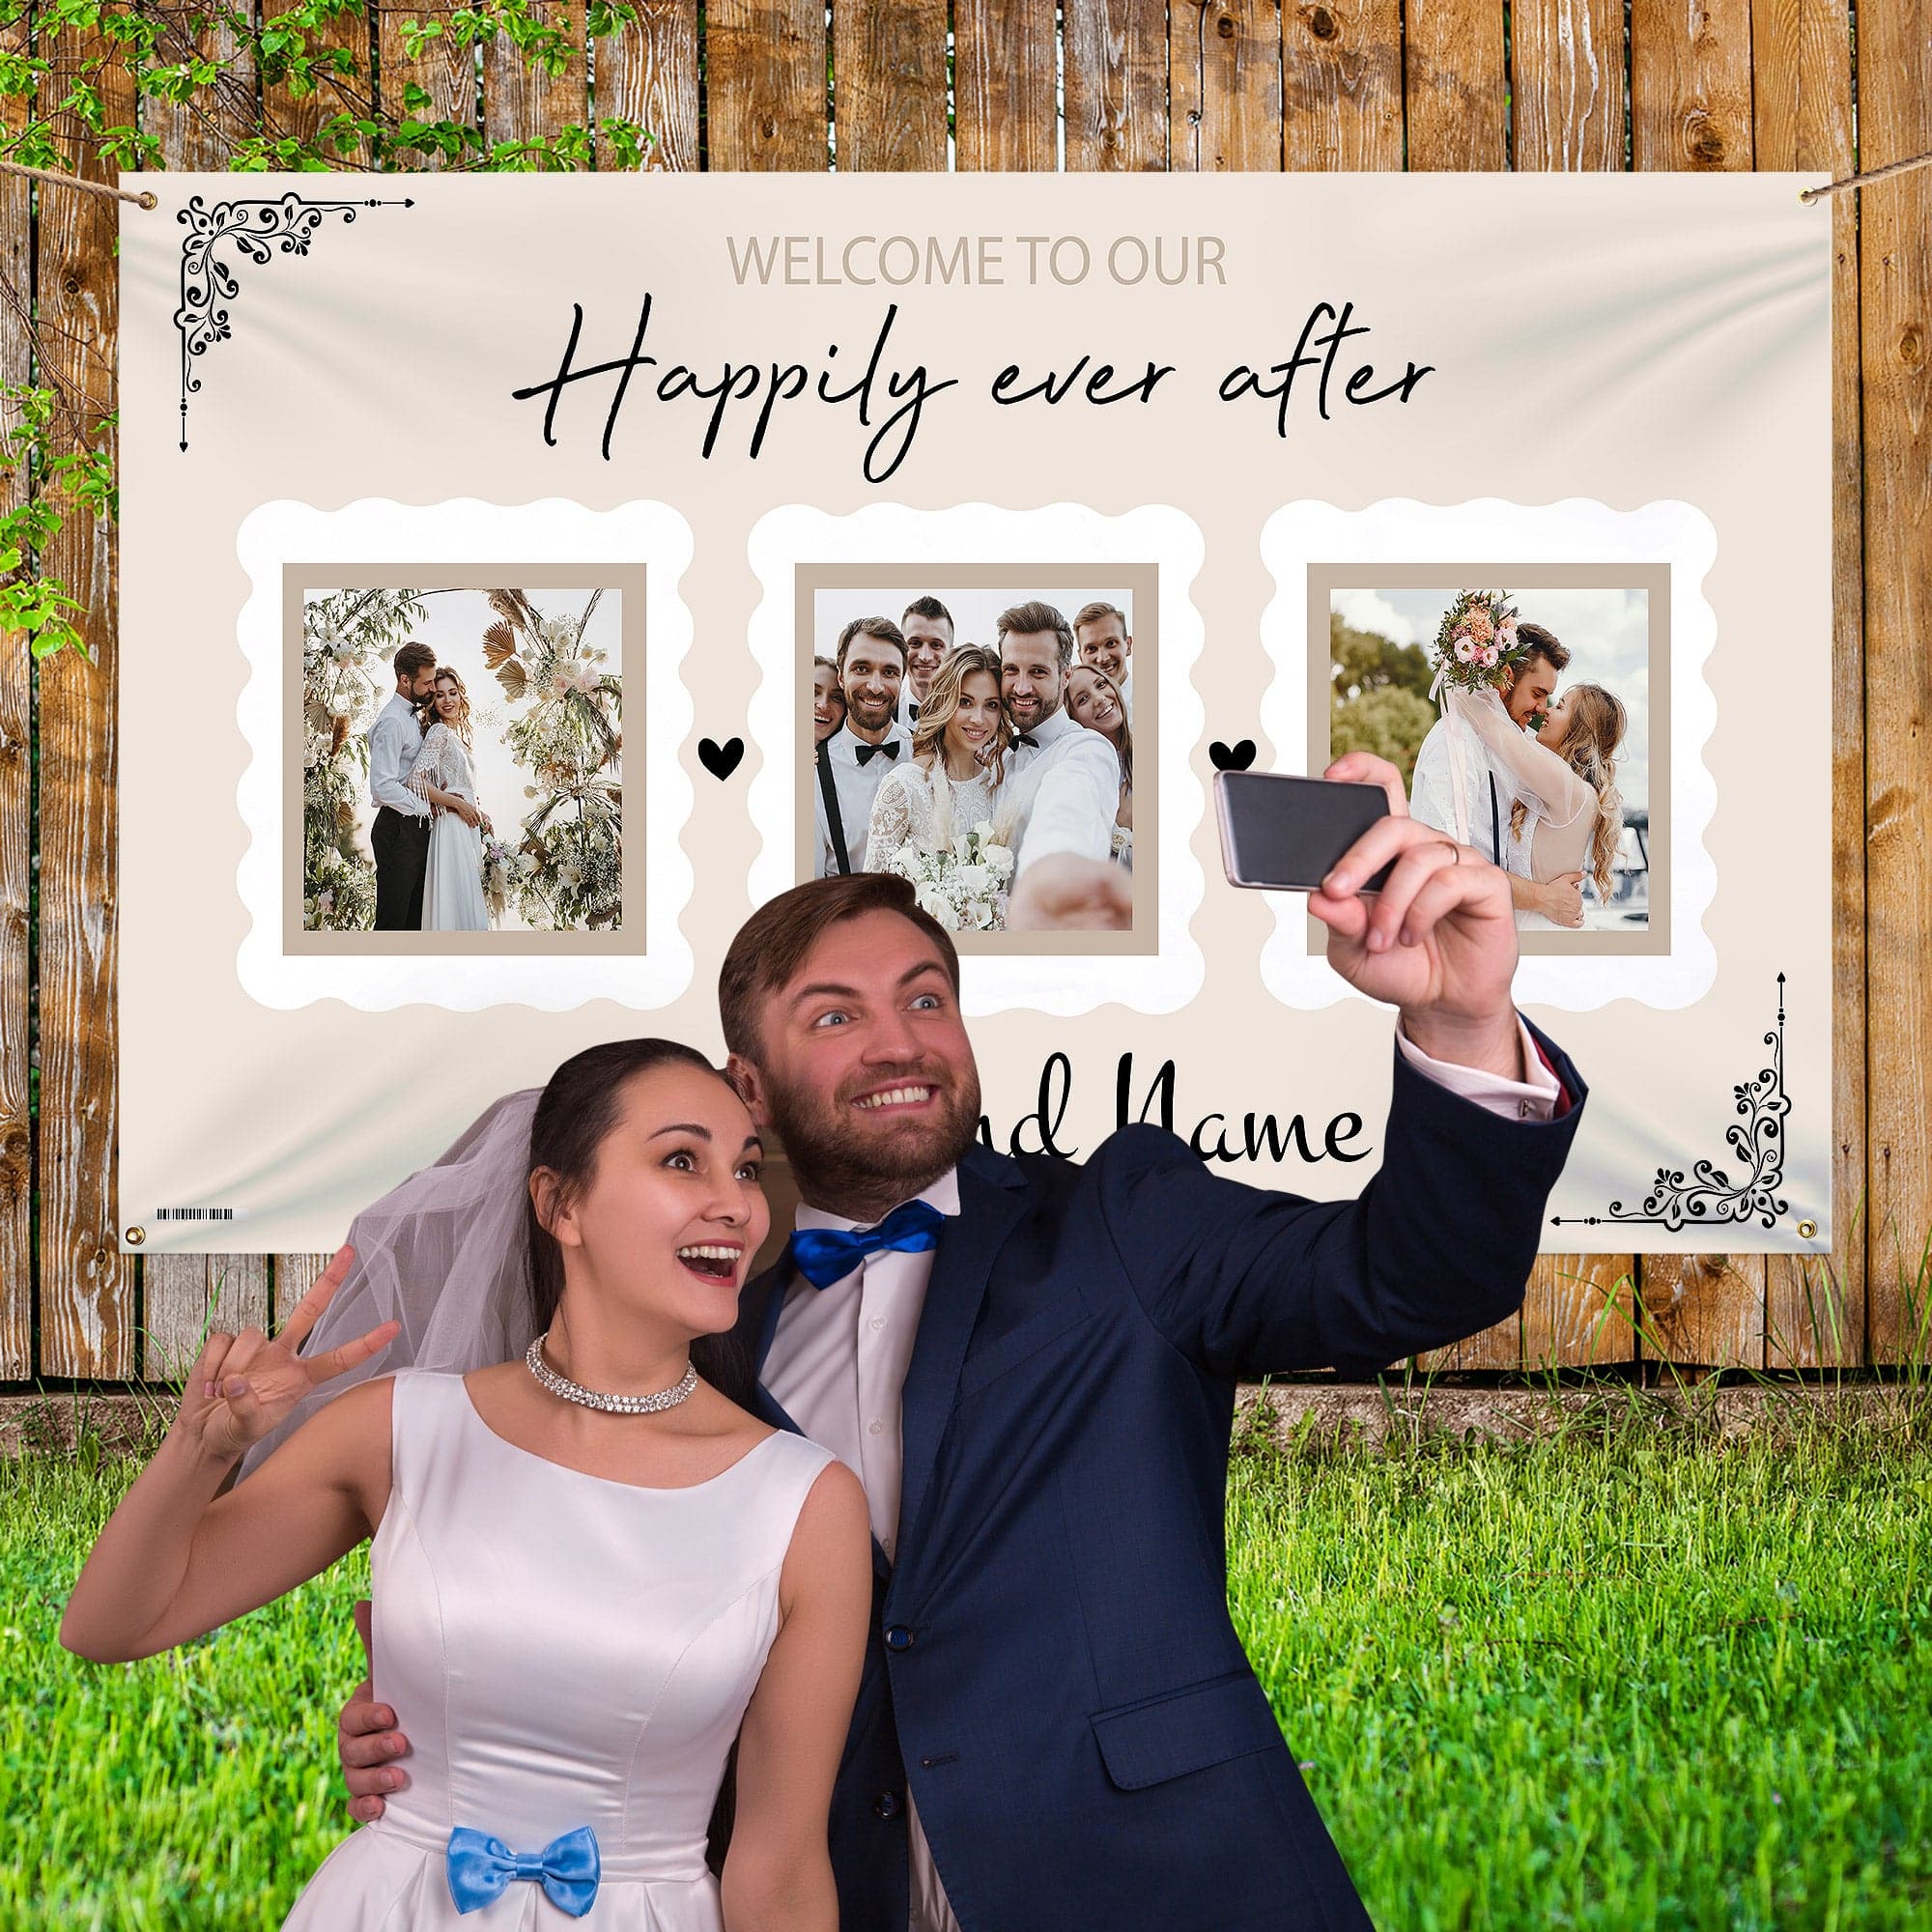 Personalised Fabric Photo Banner 5ft x 3ft - Wedding Happily Ever After